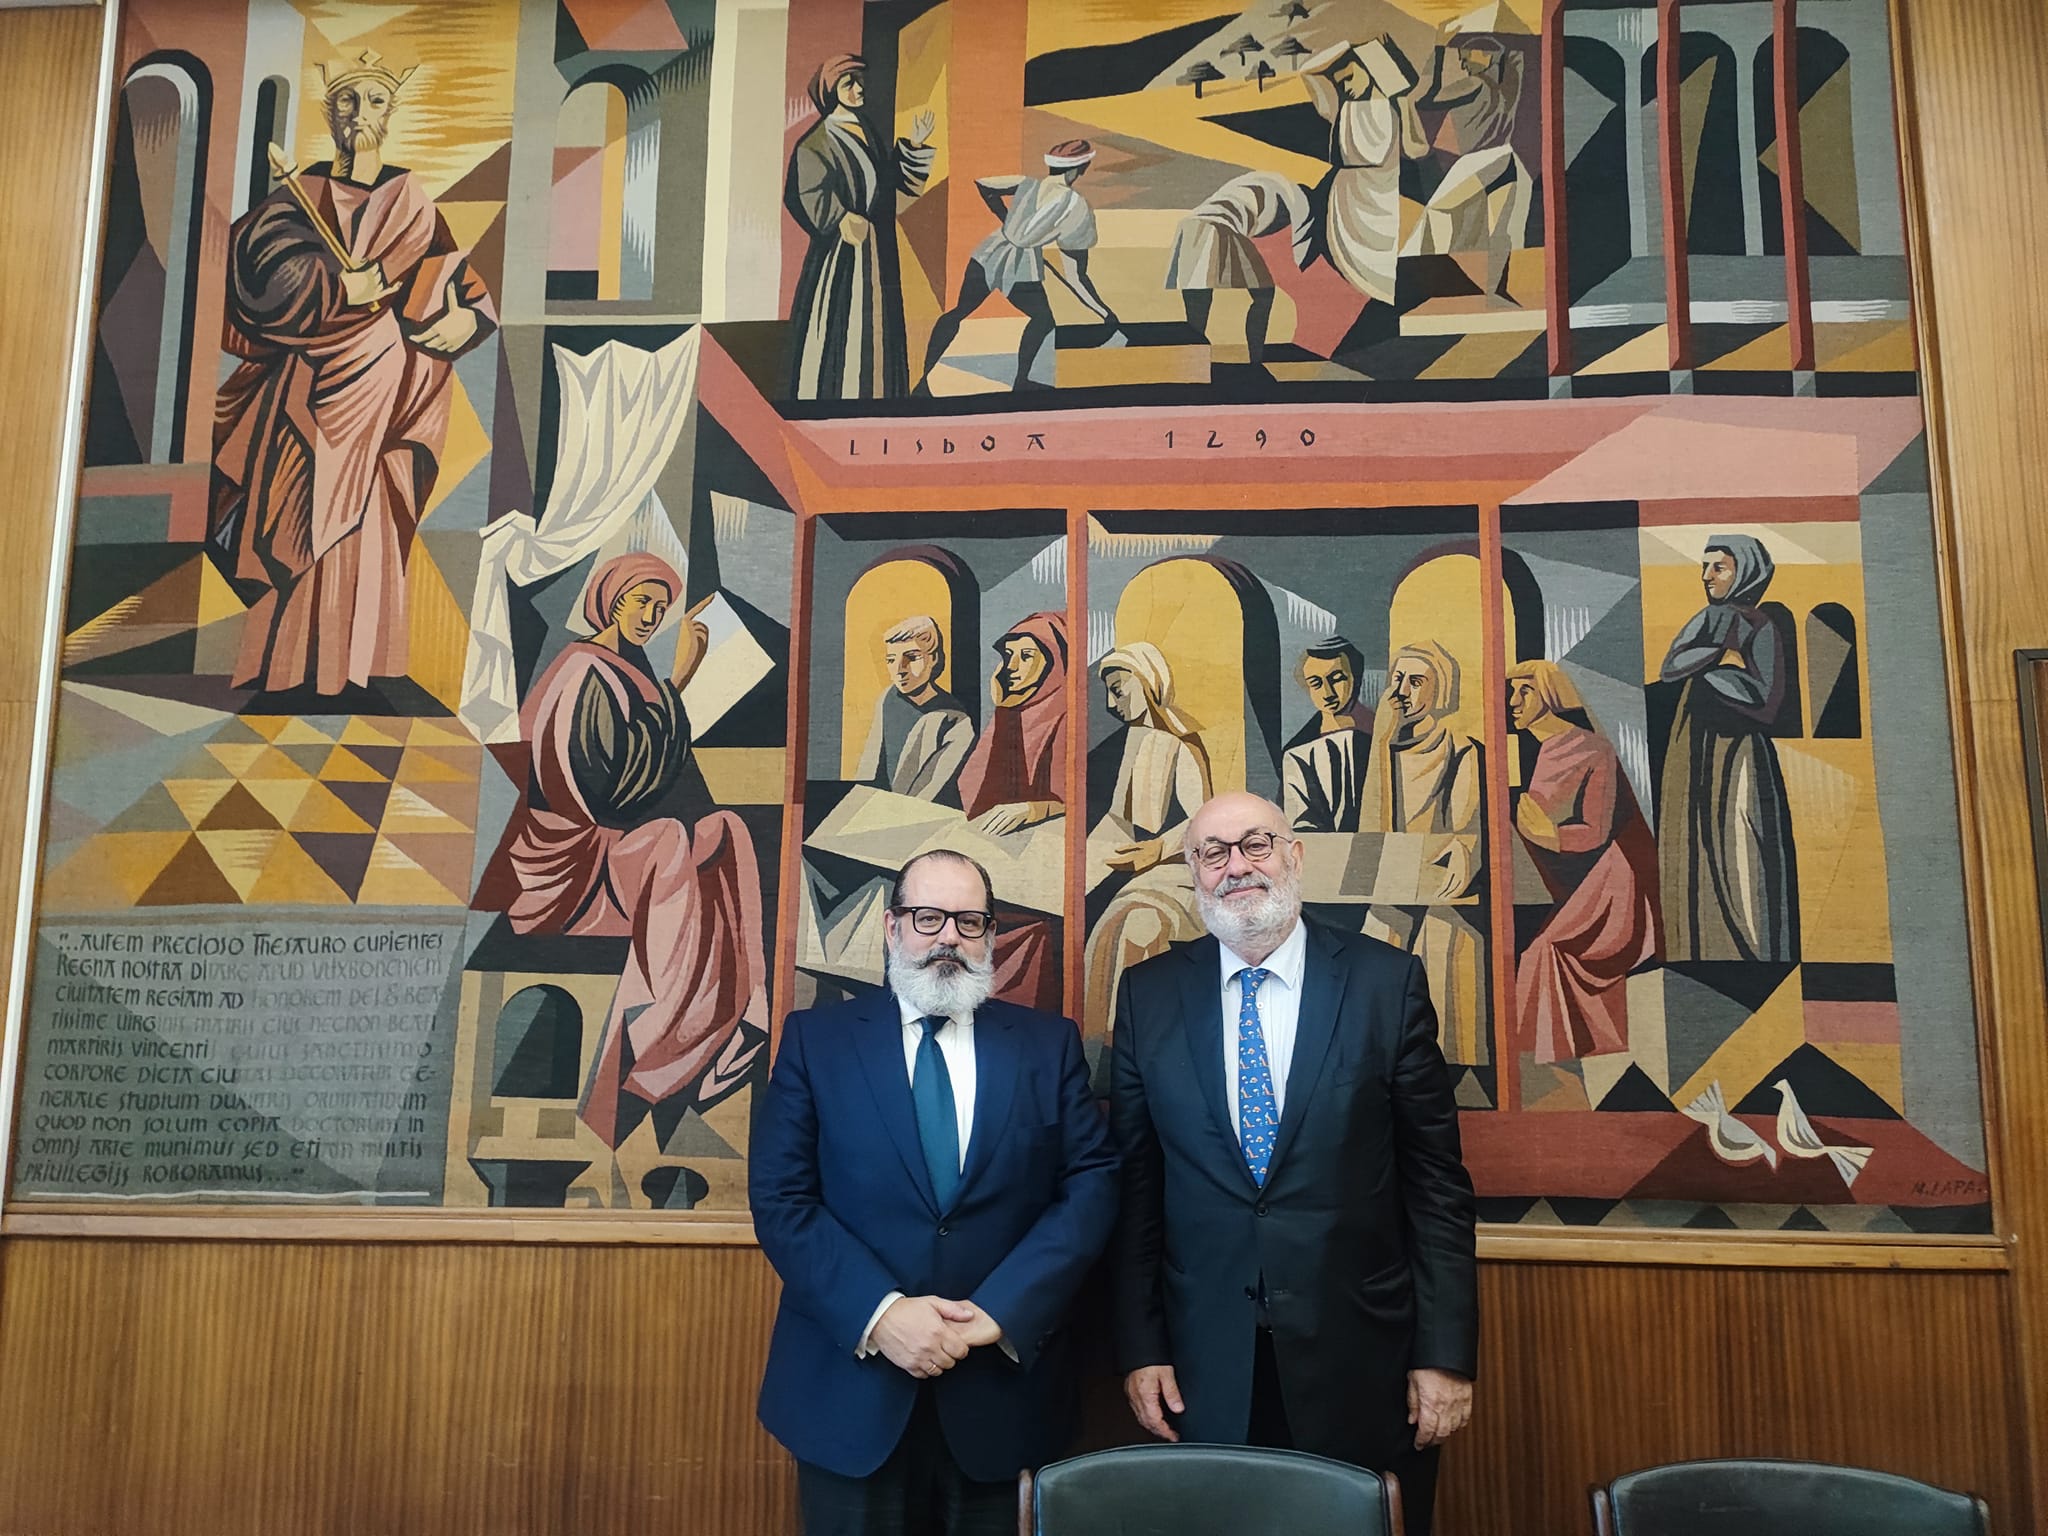 On February 29 Ambassador Ivan Naydenov held a meeting with the new dean of the Faculty of Letters of the Lisbon university prof. dr. Hermenegildo Fernandes